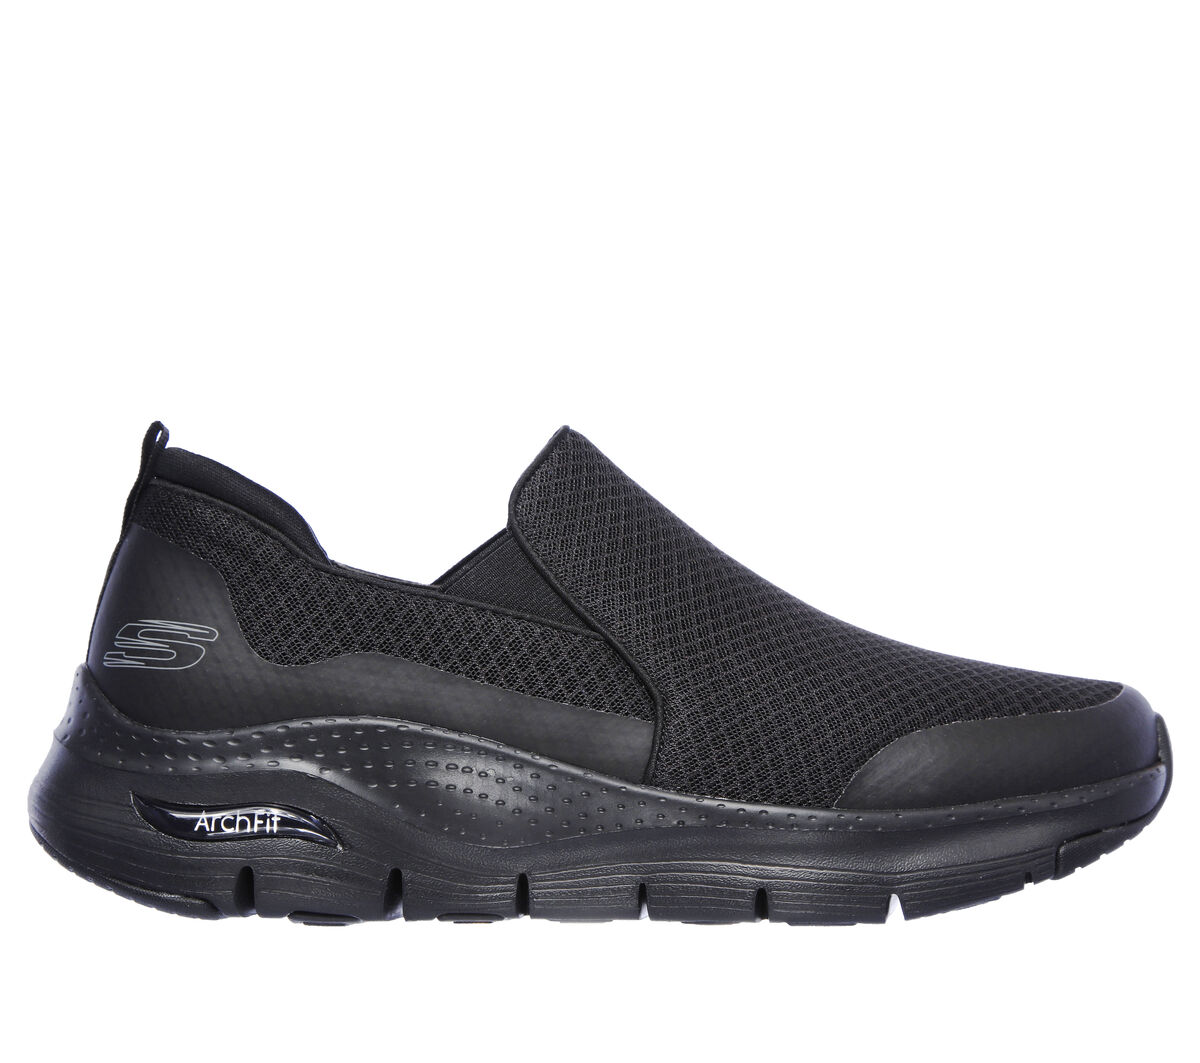 SKECHERS - SKECHERS ARCH FIT – BANLIN Your feet will thank you for the  supportive comfort and sporty style of the SKECHERS Arch Fit - Banlin shoe.  Athletic woven mesh fabric and